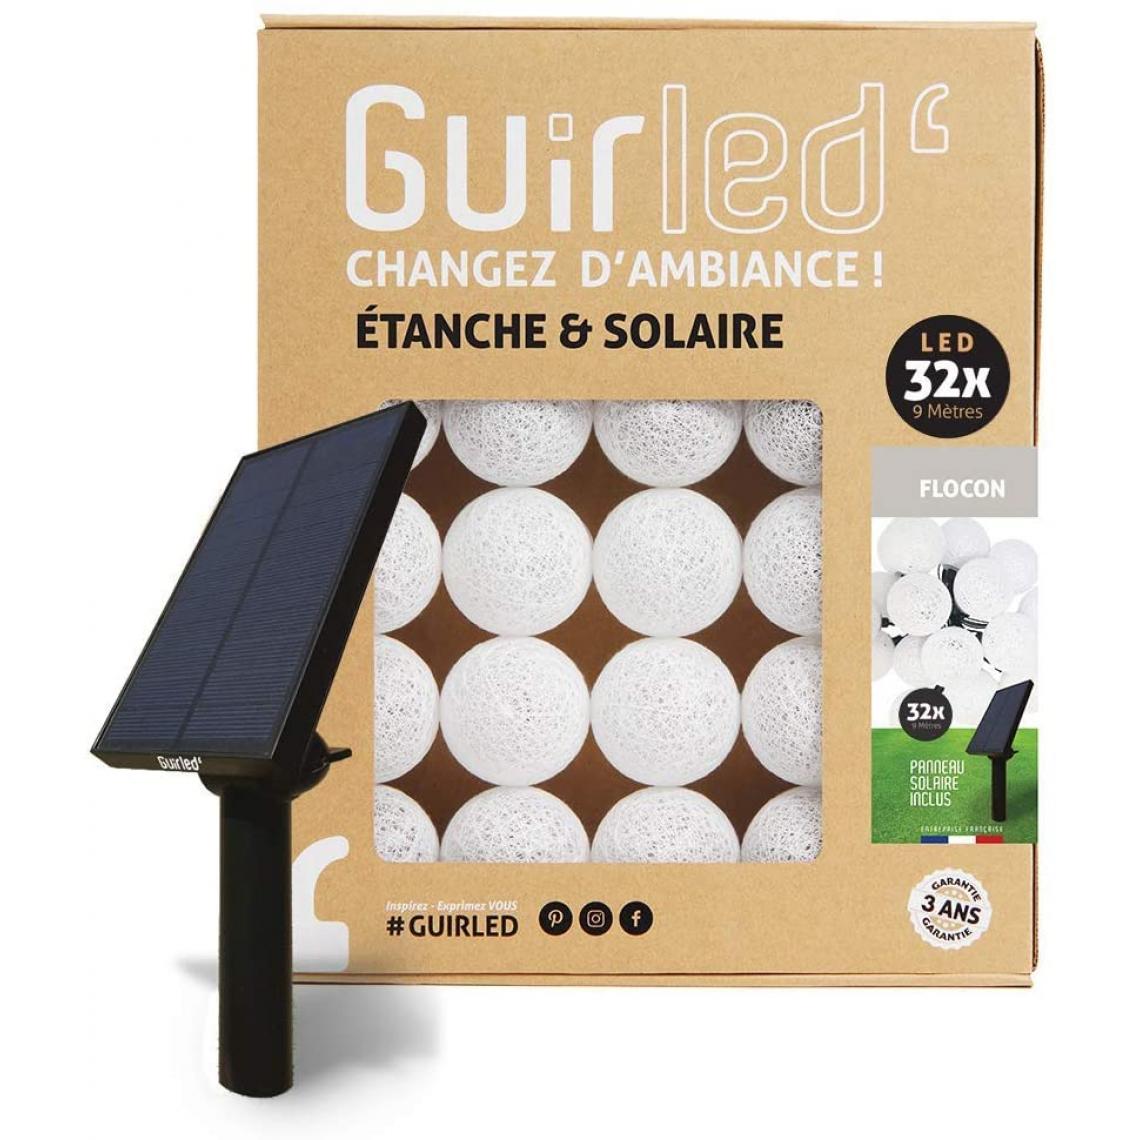 Guirled - Guirlande boule lumineuse 32 LED Outdoor - Flocon - Eclairage solaire